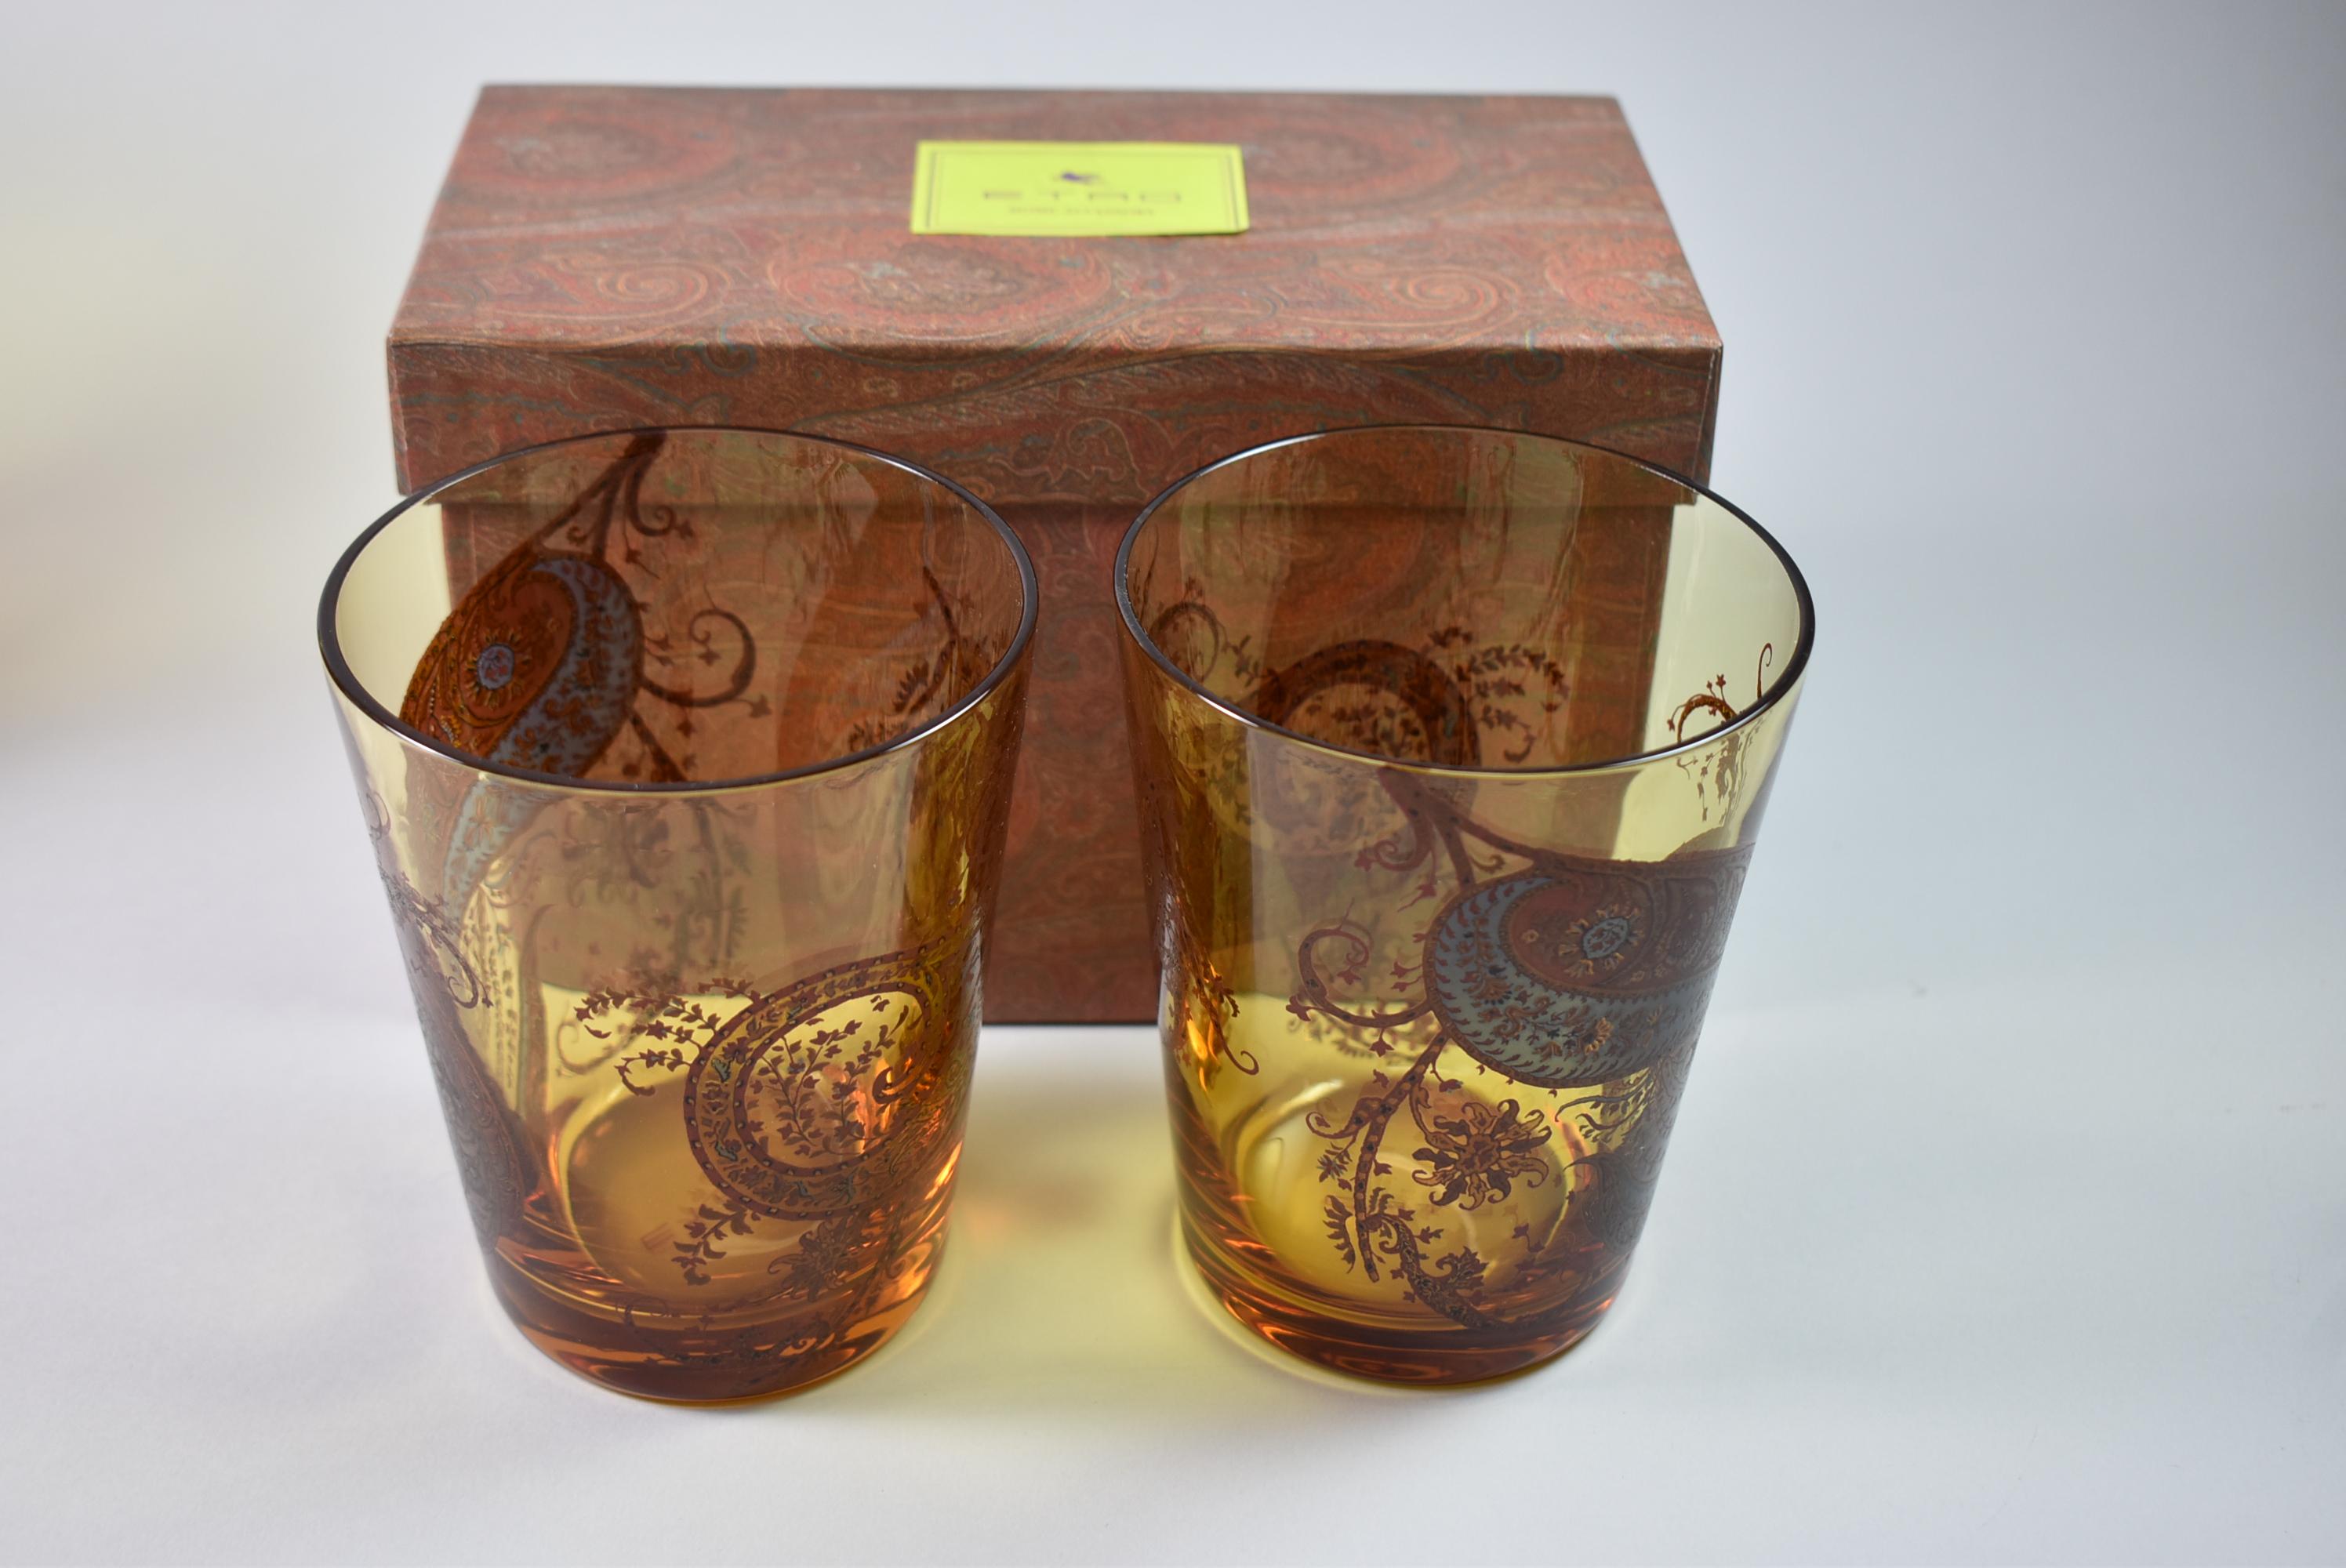 Etro Home Accessories paisley pattern pitcher with two glasses. Very nice condition. Serving tray with same pattern is available in additional listing. Glasses measure 4.5